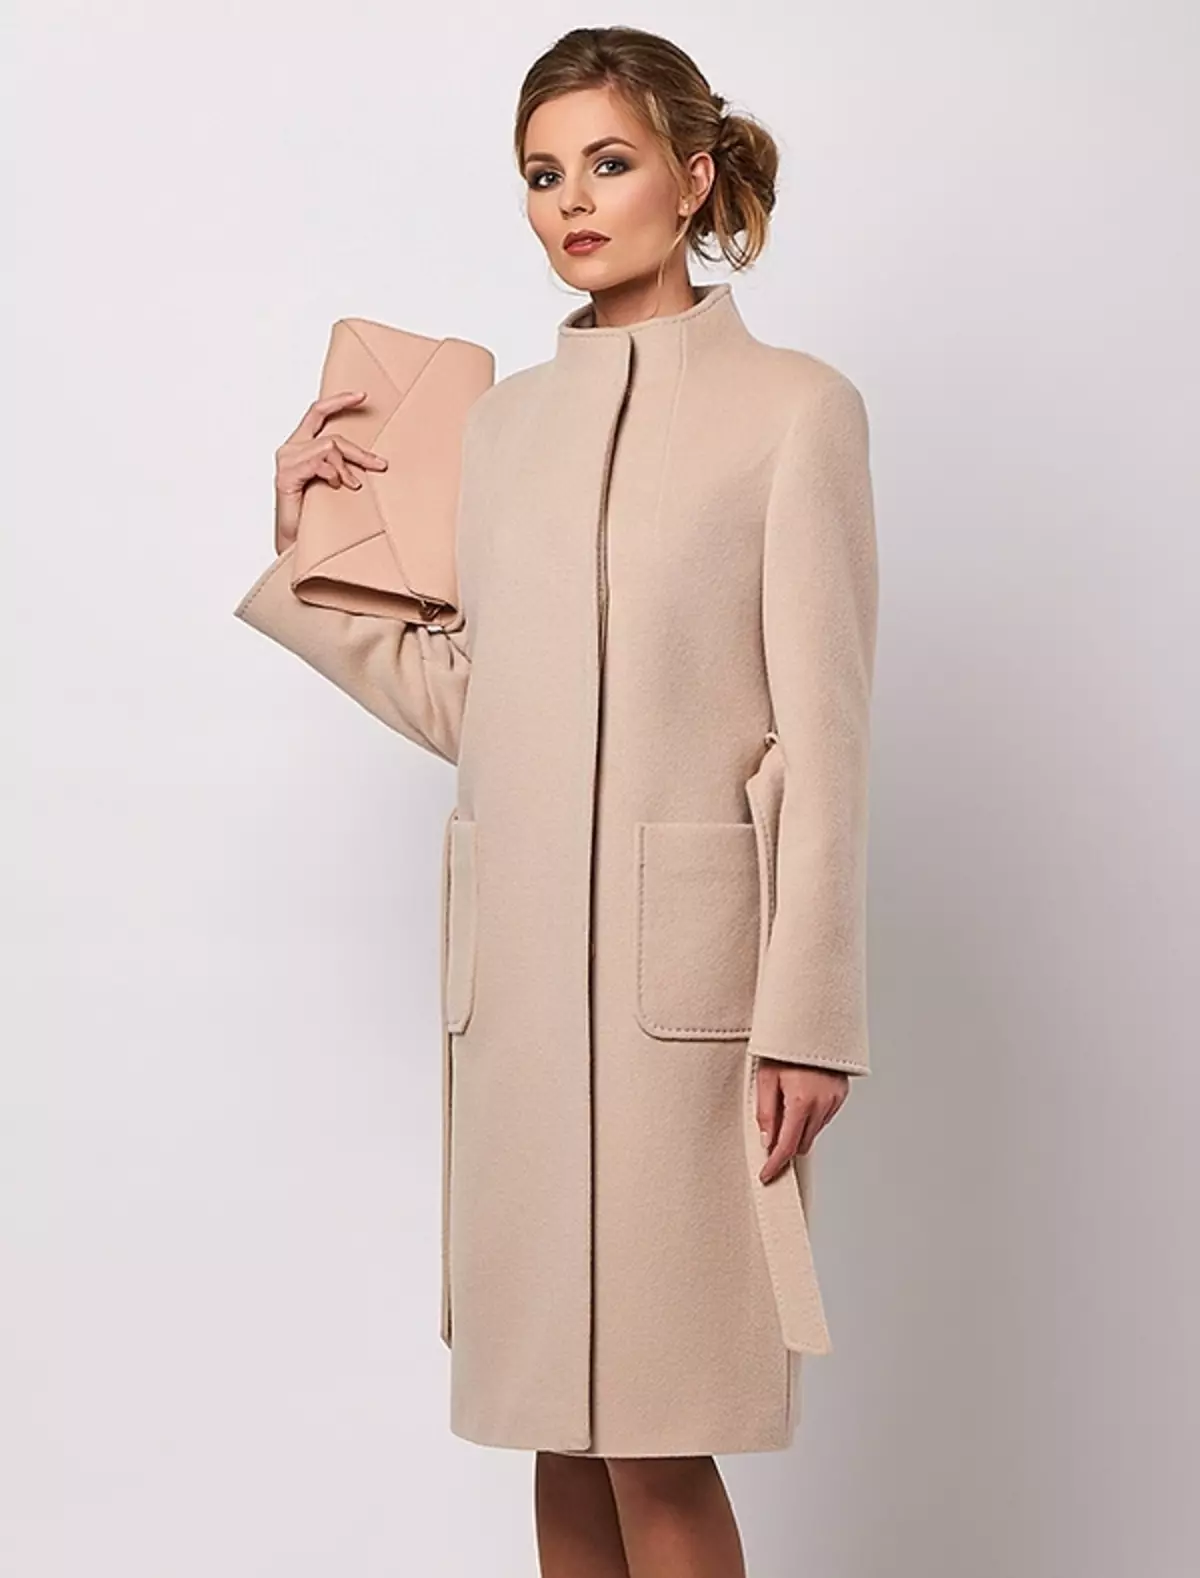 Personne Coat (30 larawan): Female luxury models from person 351_26